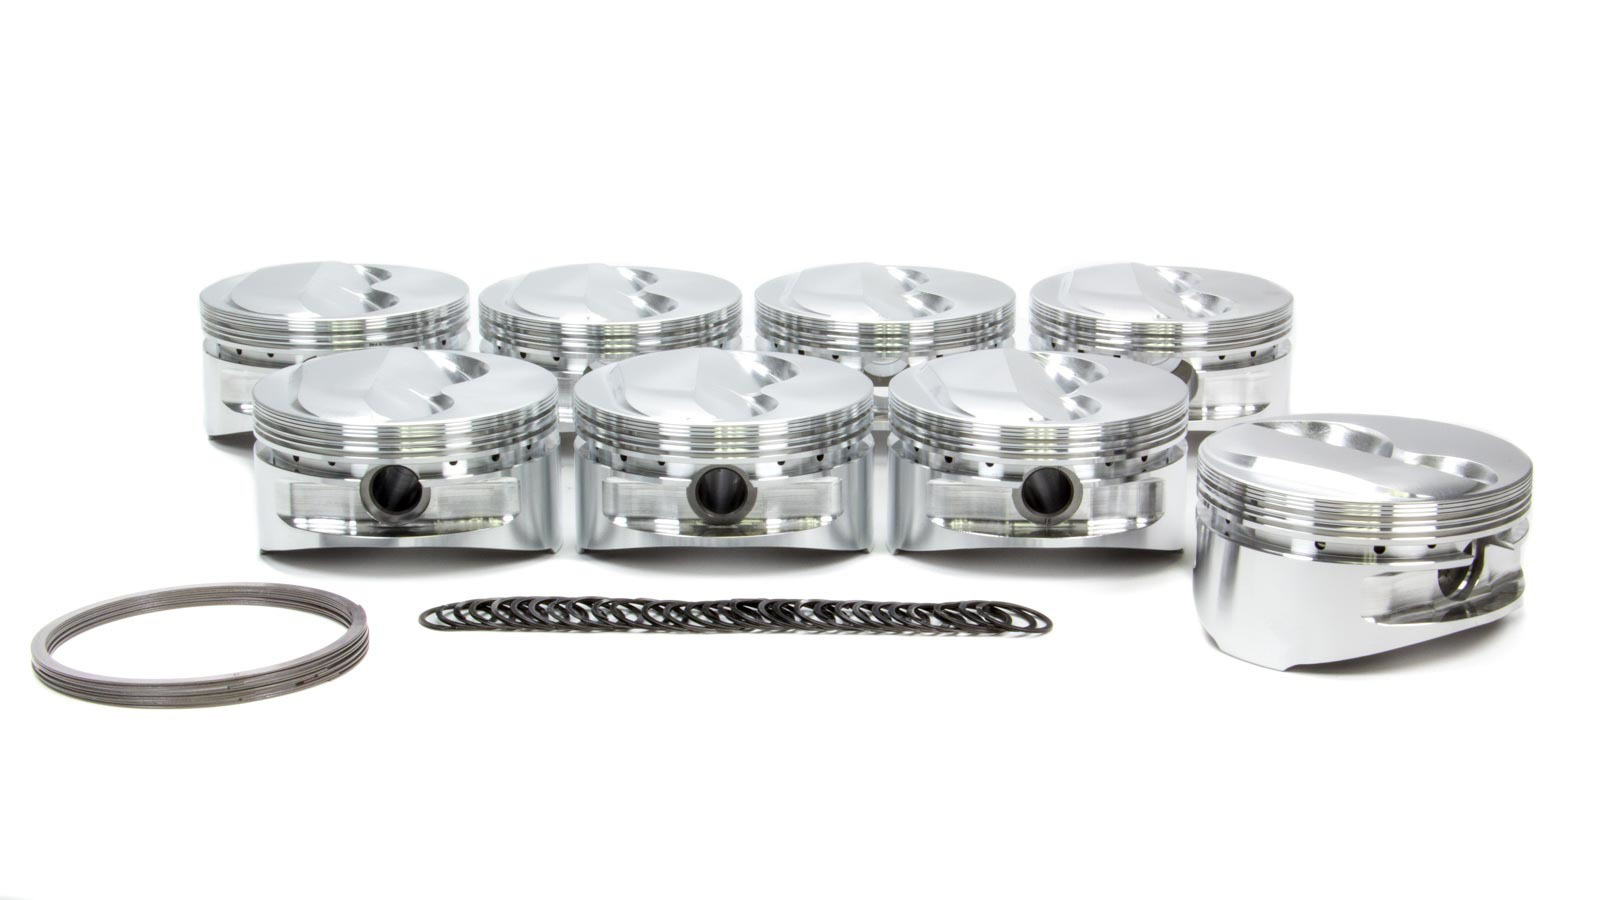 JE Pistons 182037 Piston, Small Block Dome, Forged, 4.165 in Bore, 1/16 x 1/16 x 3/16 in Ring Grooves, Plus 5.60 cc, Small Block Chevy, Set of 8